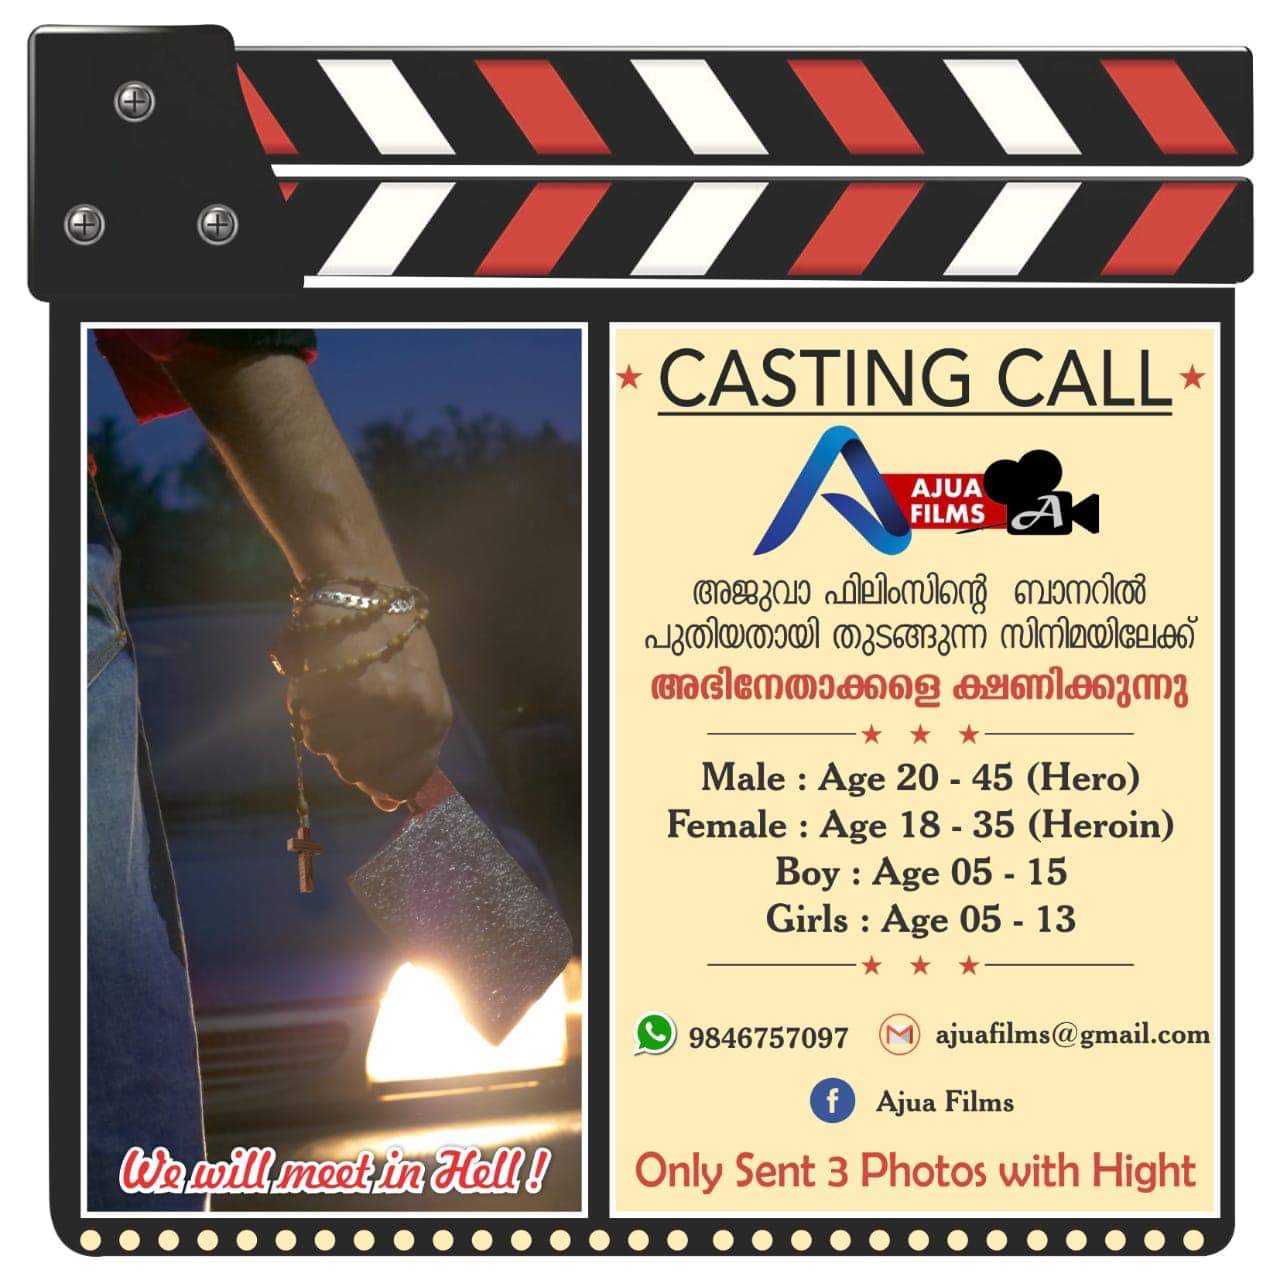 Casting Call For New Malayalam Movie By Ajua Films